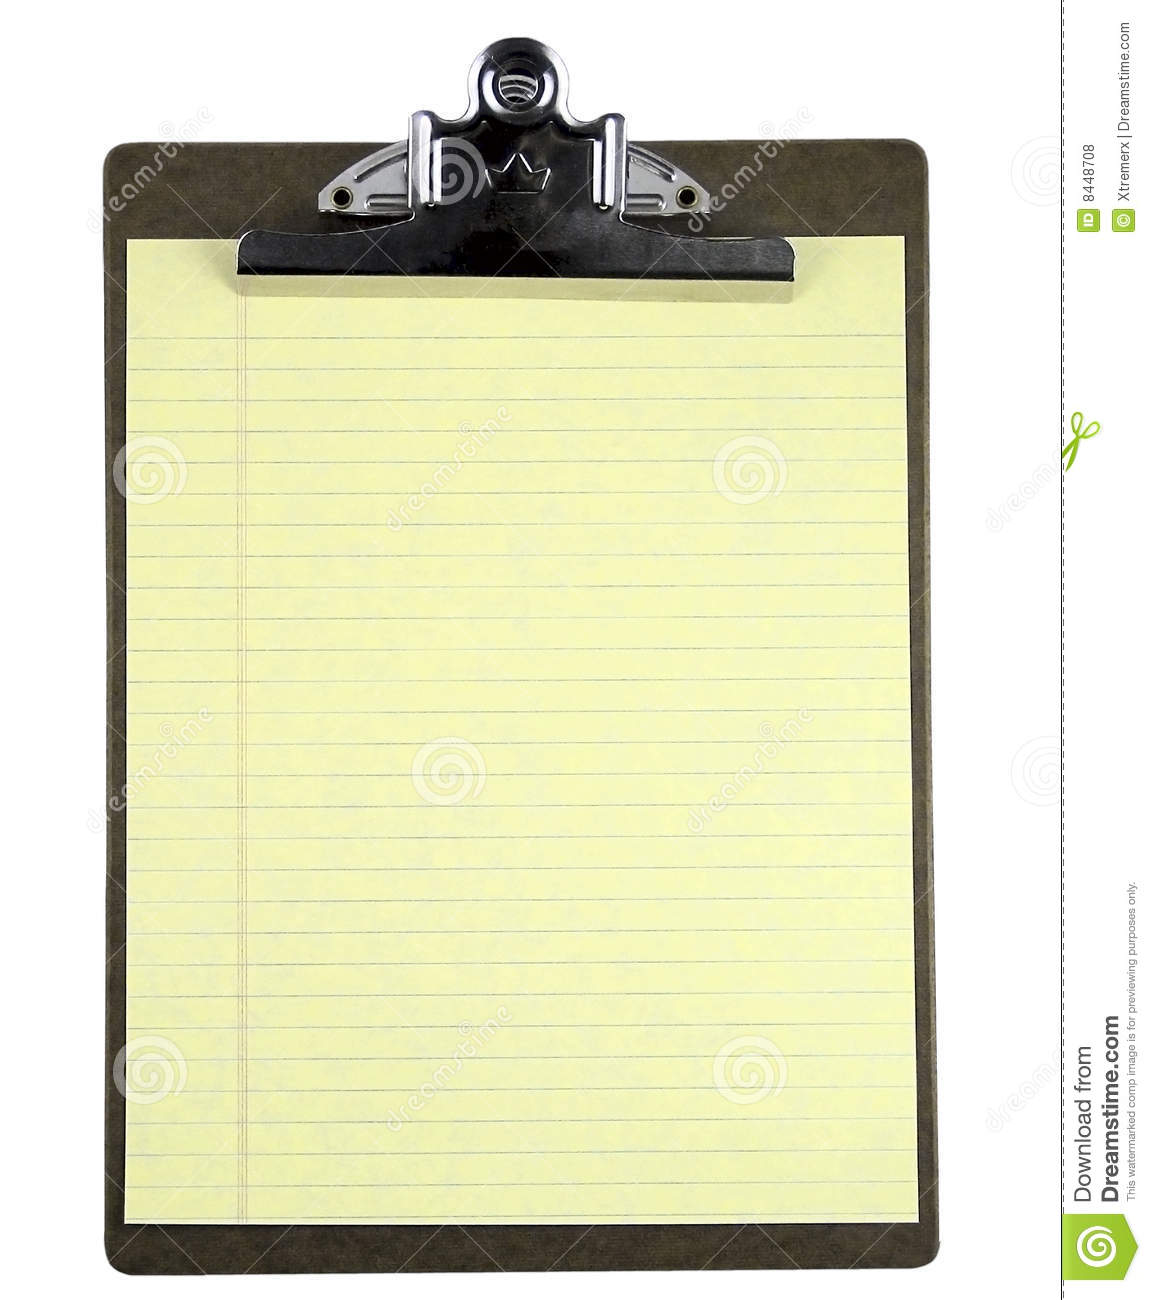 Blank Clipboard Notepad Isolated On White  Royalty Free Stock Photos